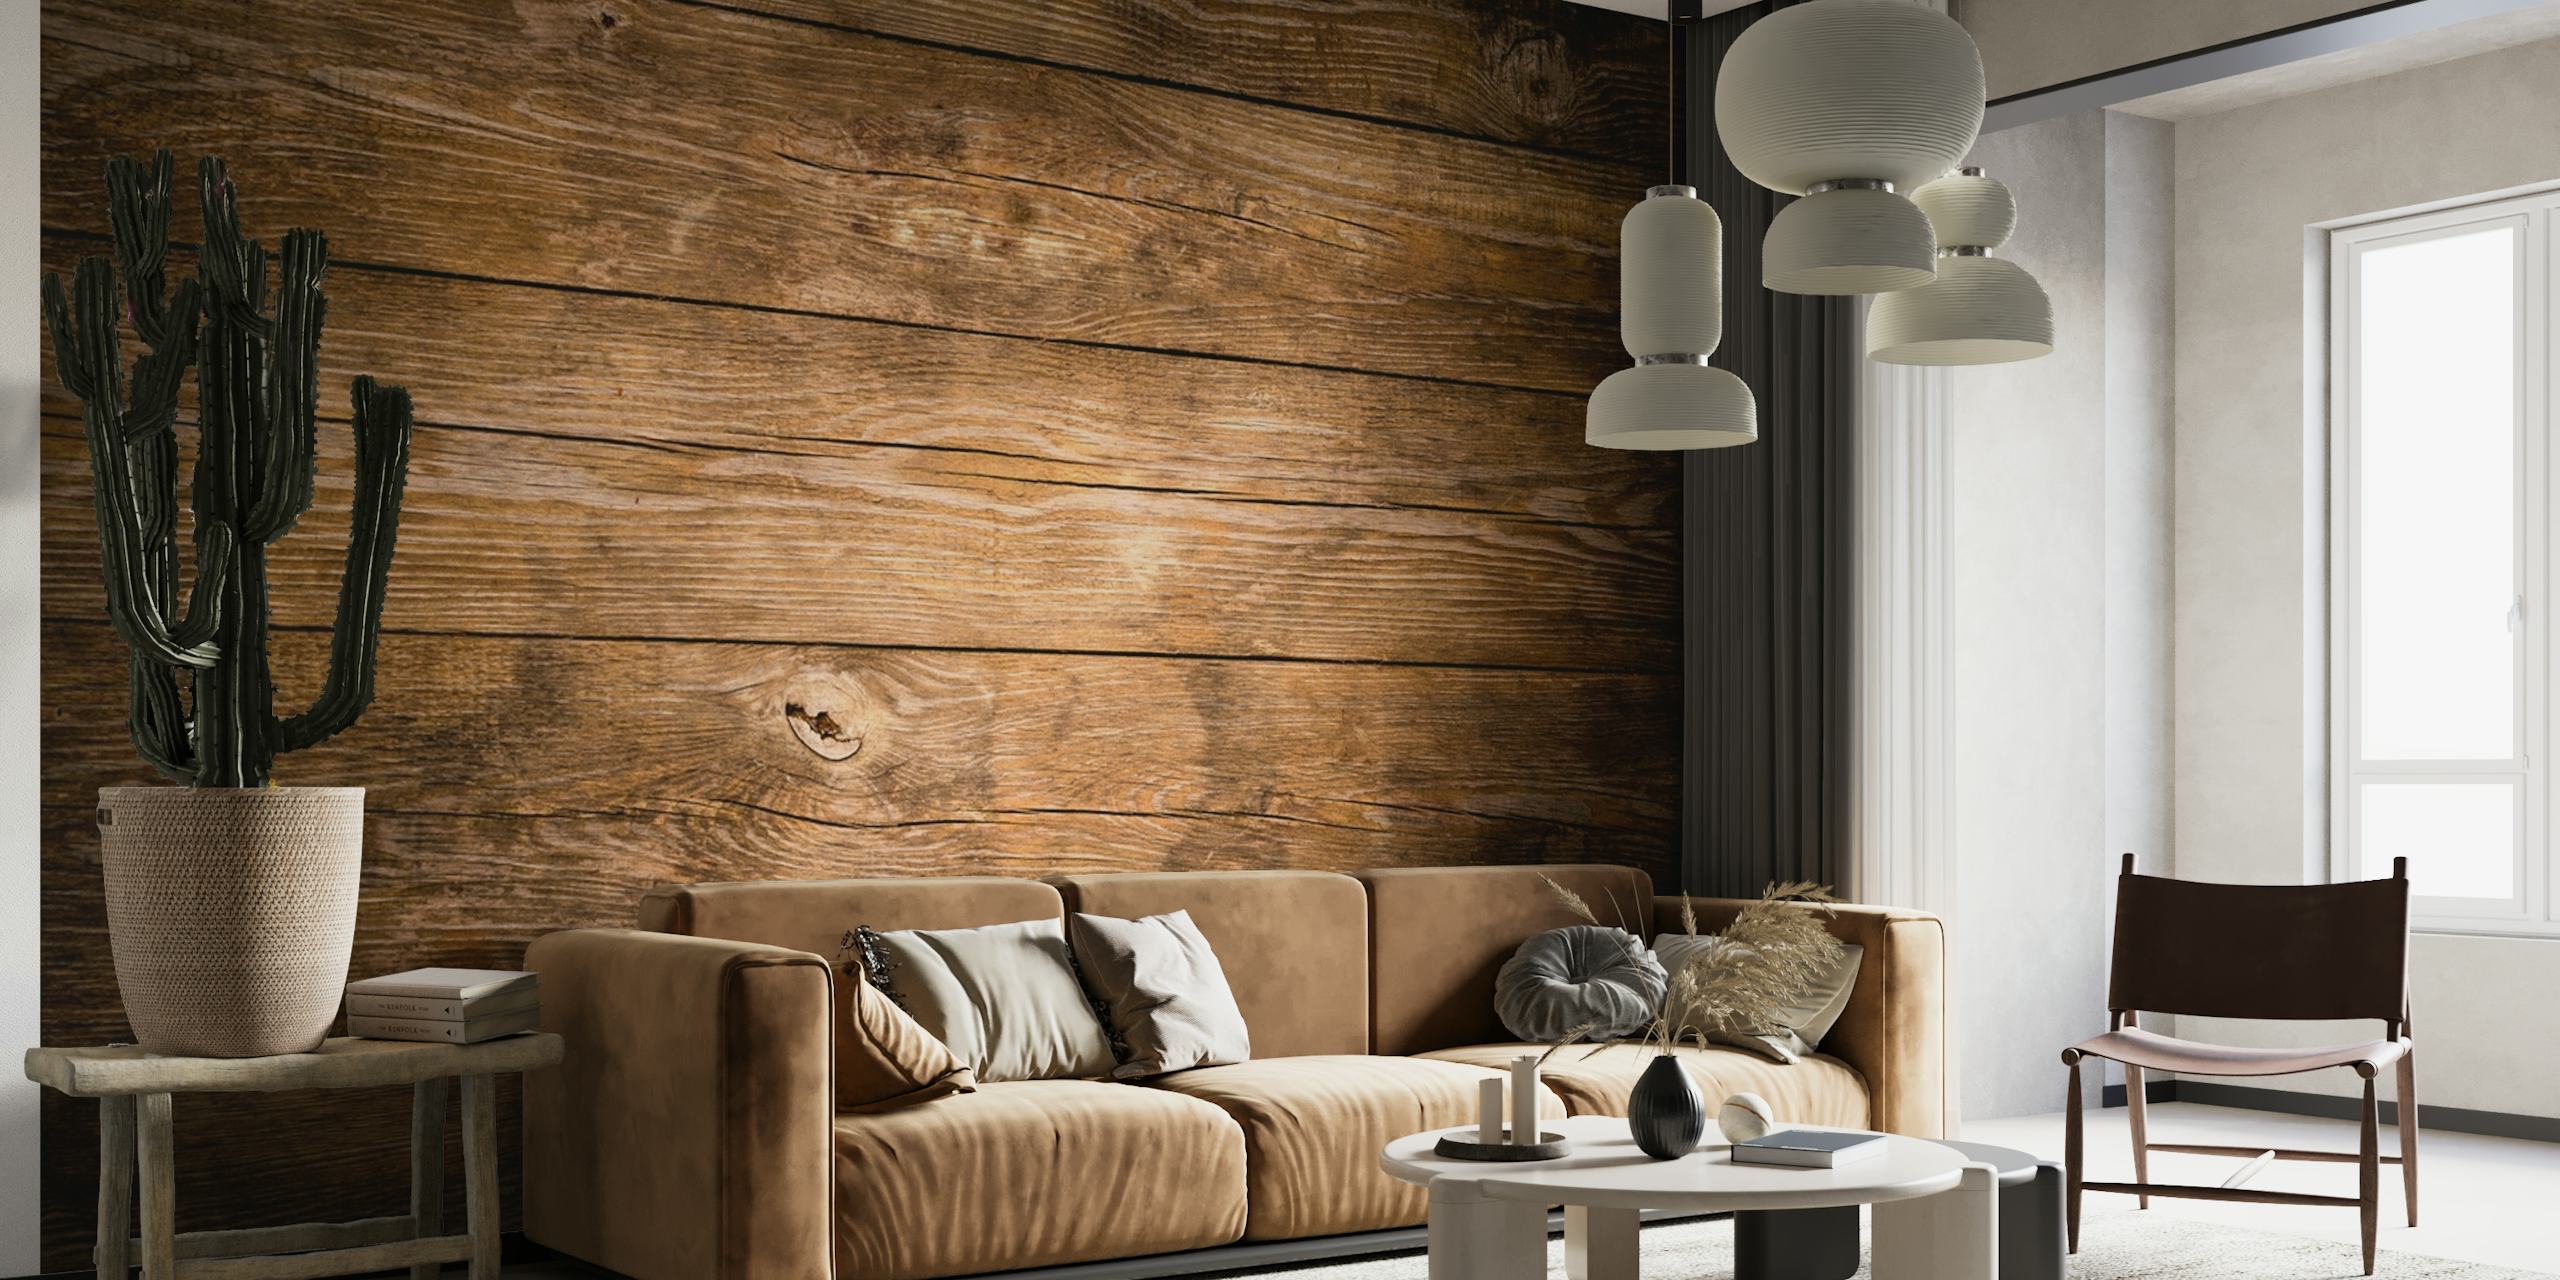 Rustic wood wall mural with textured wooden plank design